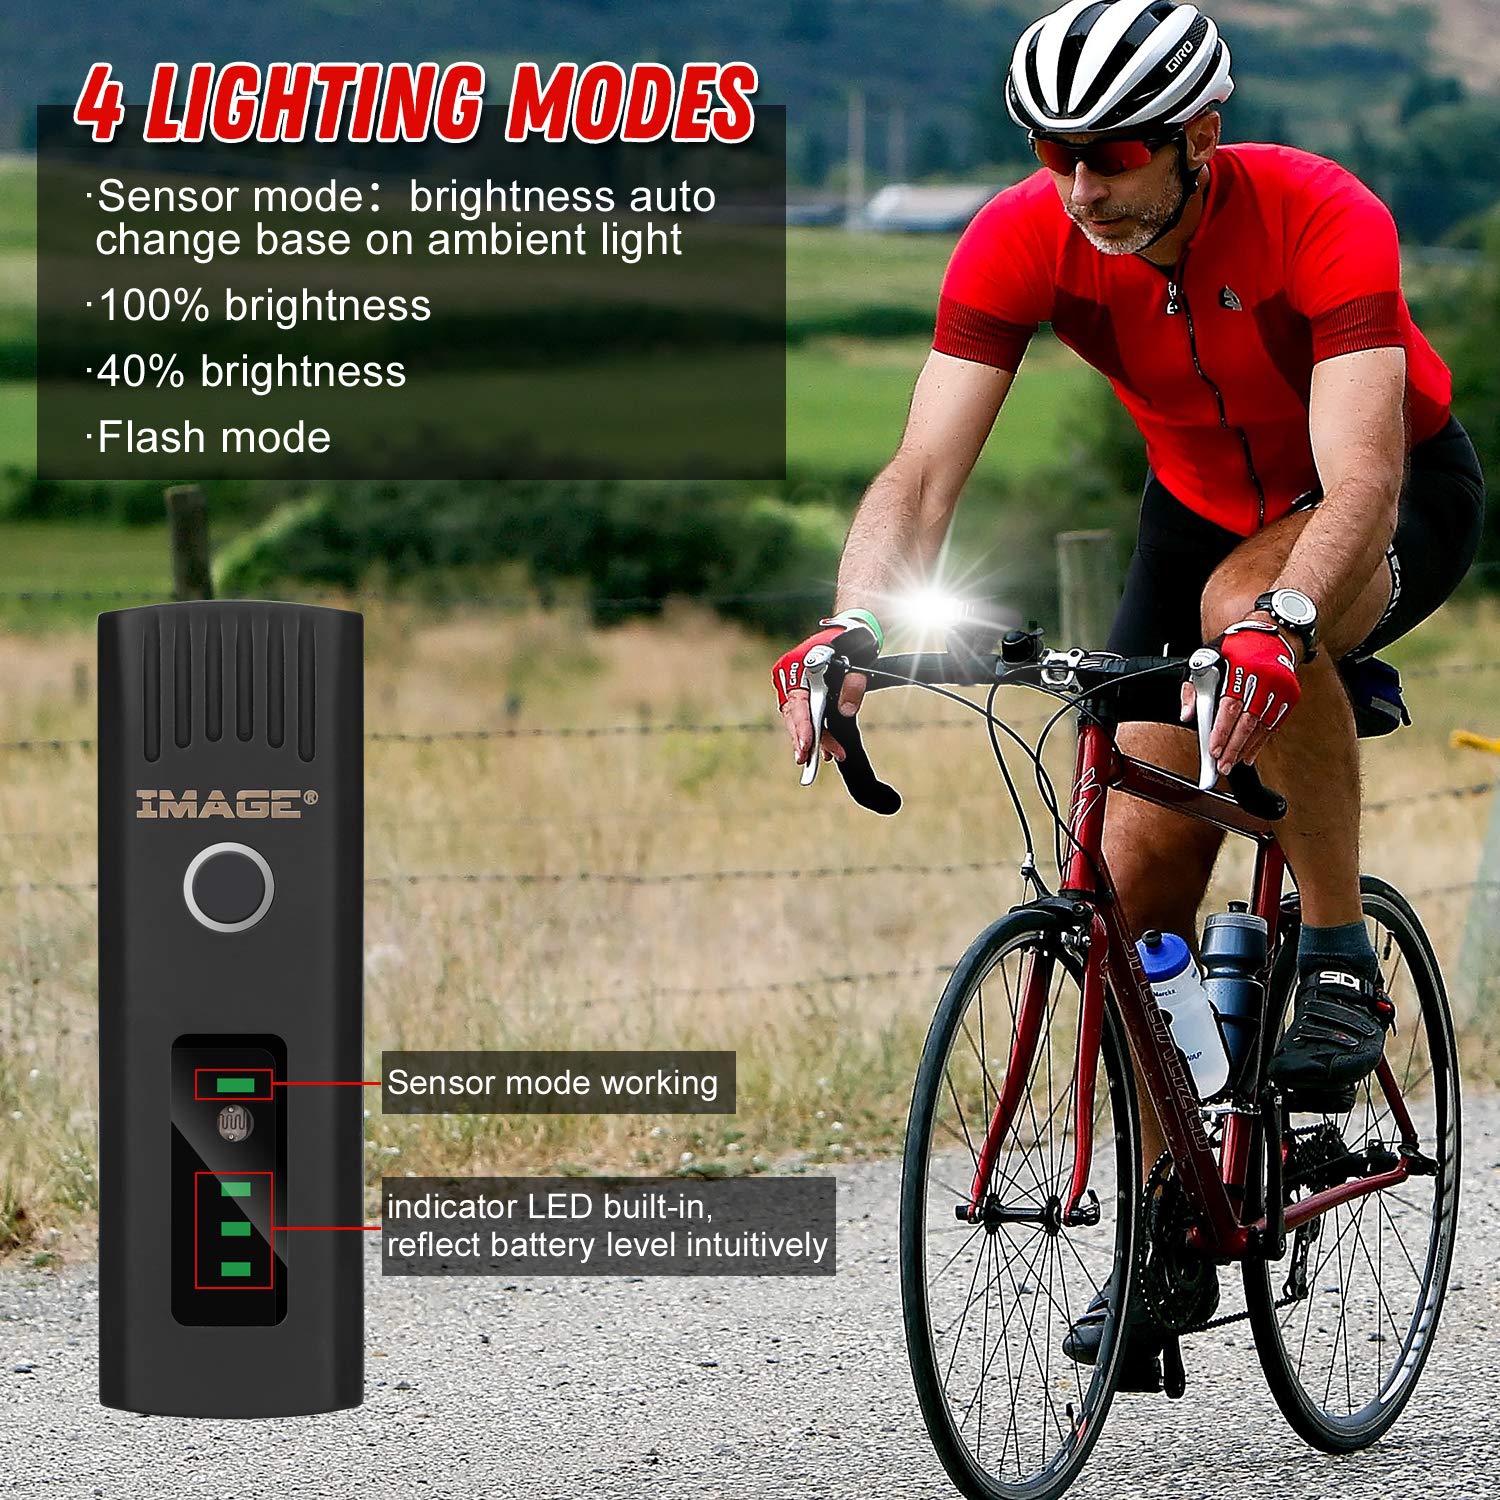 350lm 4 Light Modes Amazing Gift Includes Front and Rear Bicycle Lights Zapa Rechargeable LED Bike Light Set | 2 USB Cables Water Resistant IPX4 Headlight + Taillight